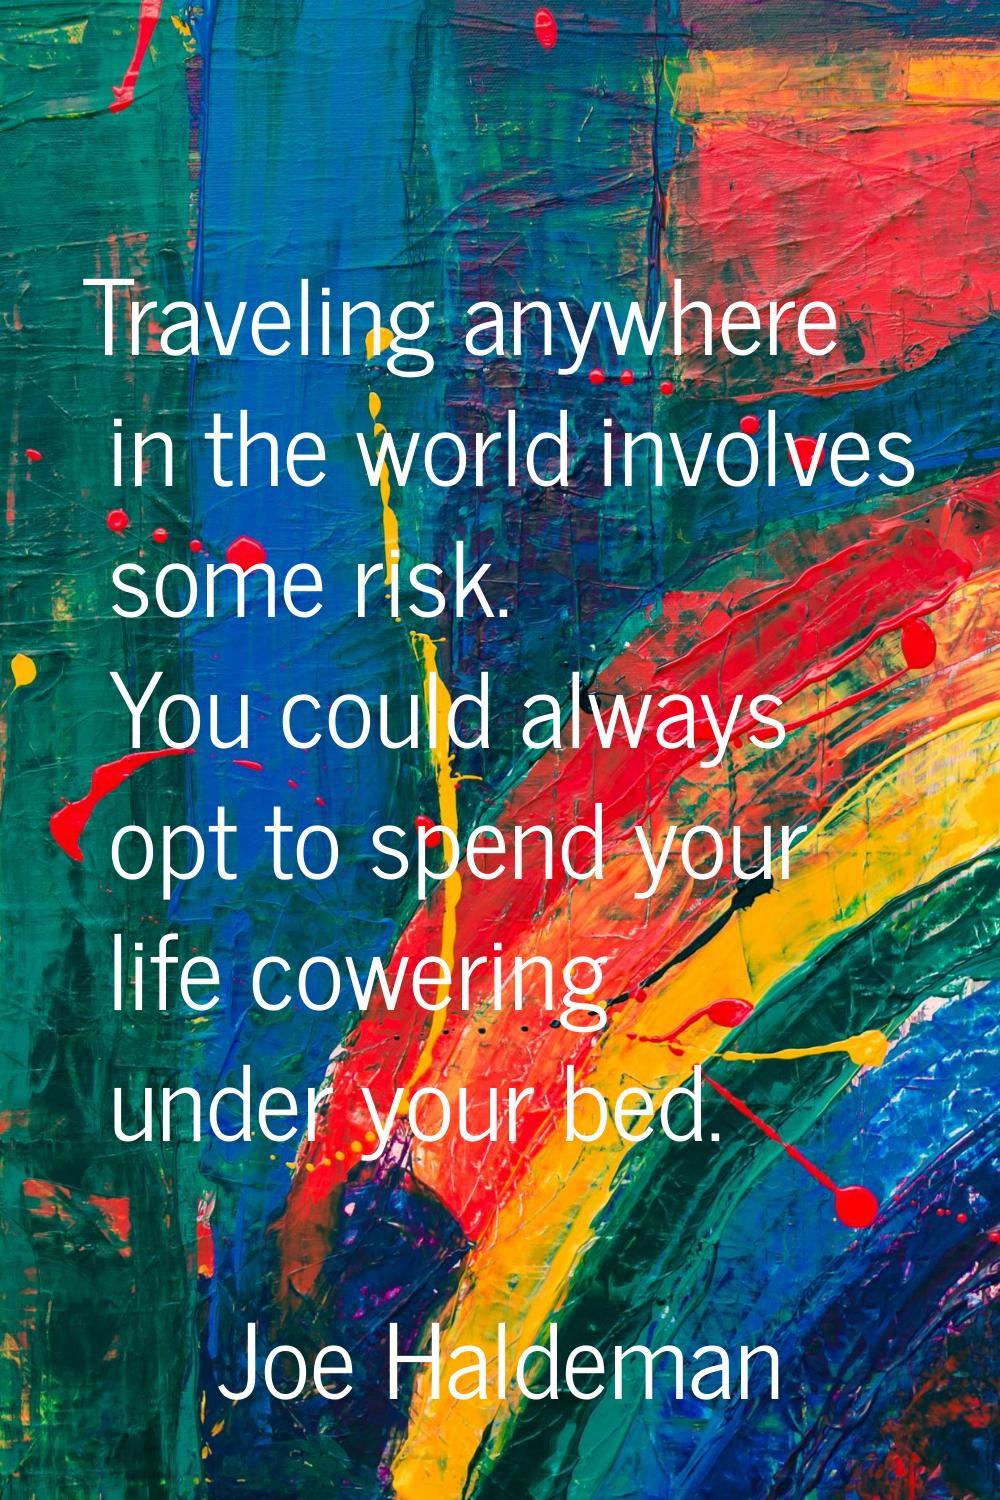 Traveling anywhere in the world involves some risk. You could always opt to spend your life cowerin